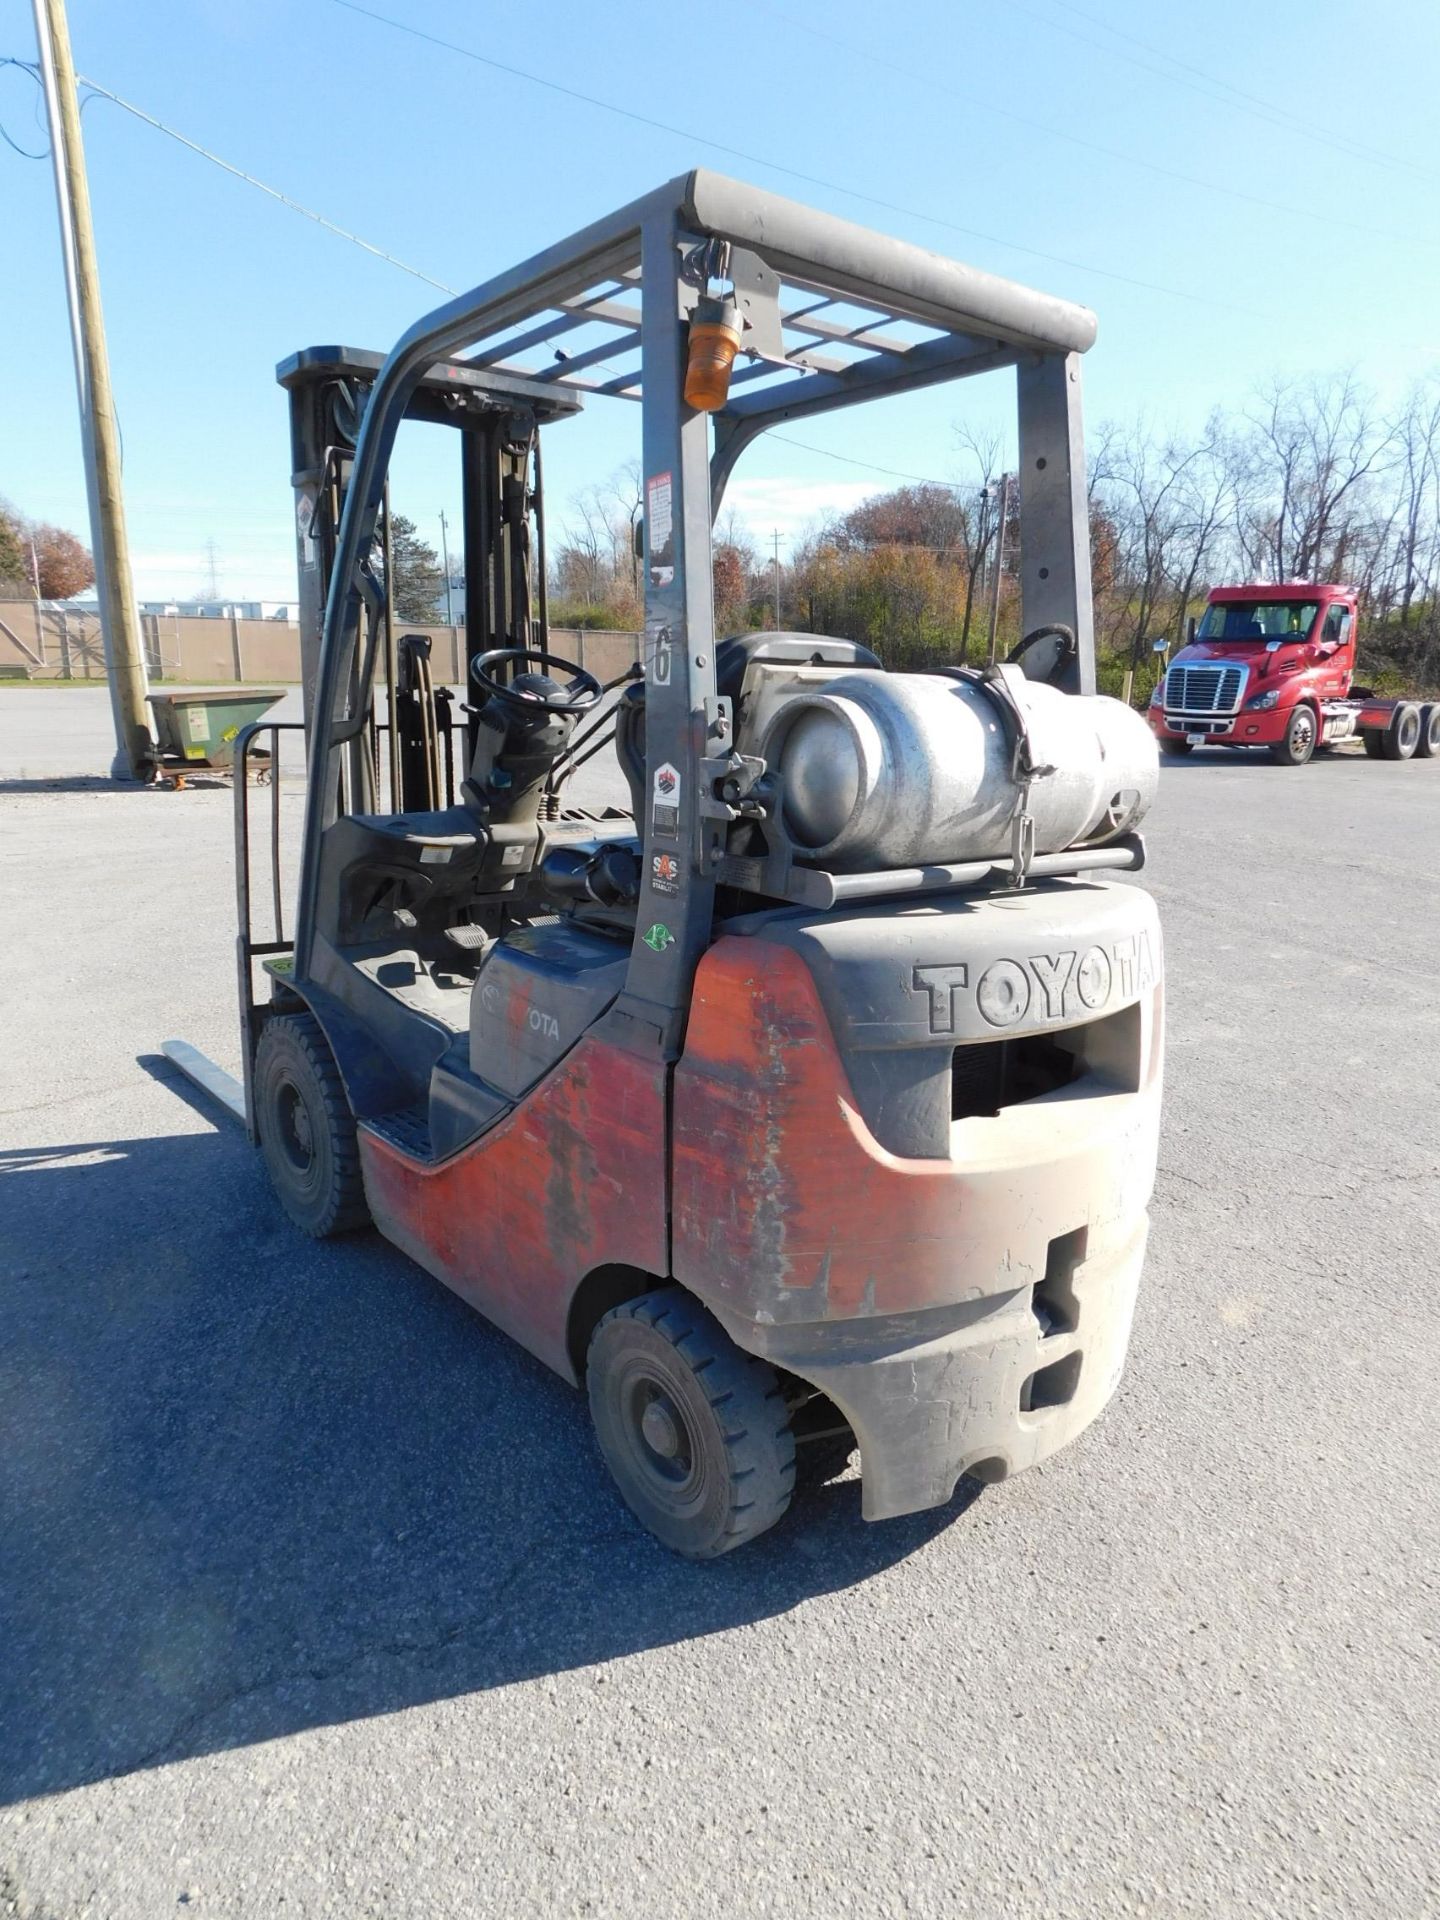 Toyota 8FGU15 Fork Lift Truck, SN 64658, 2,500 lb. Max. Load Capacity, LP Gas Engine, Overhead - Image 5 of 21